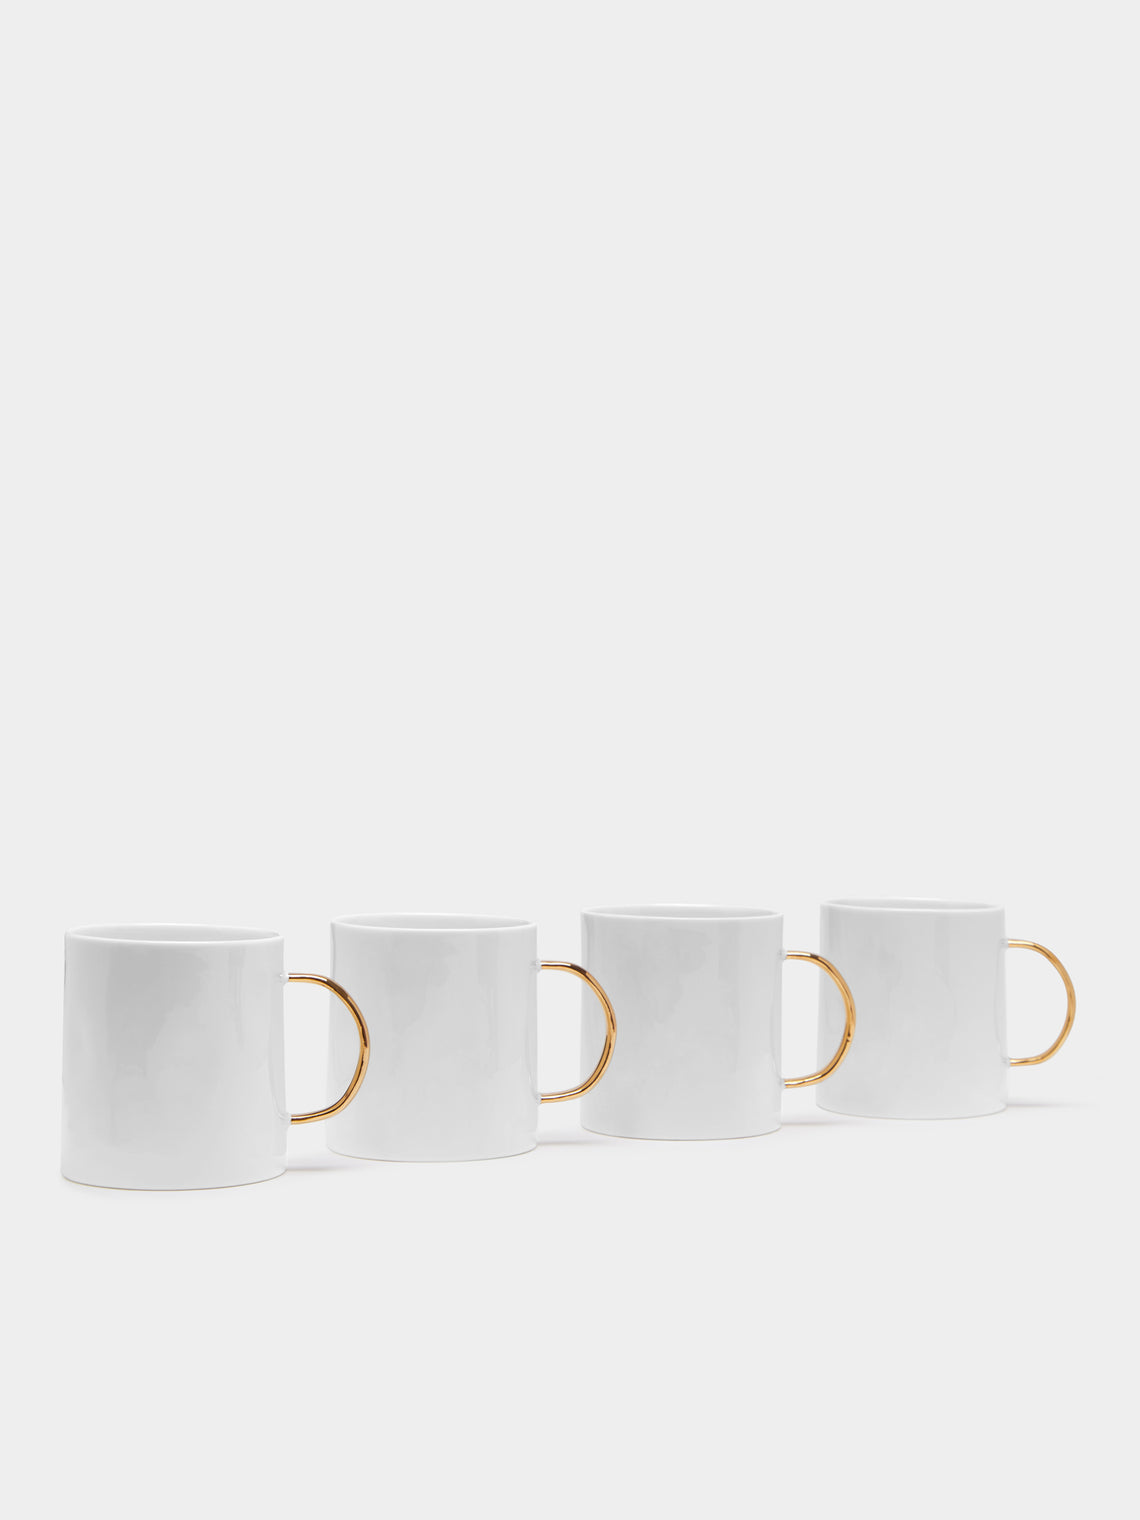 Feldspar - Hand-Painted 24ct Gold and Bone China Coffee Cups (Set of 4) - White - ABASK